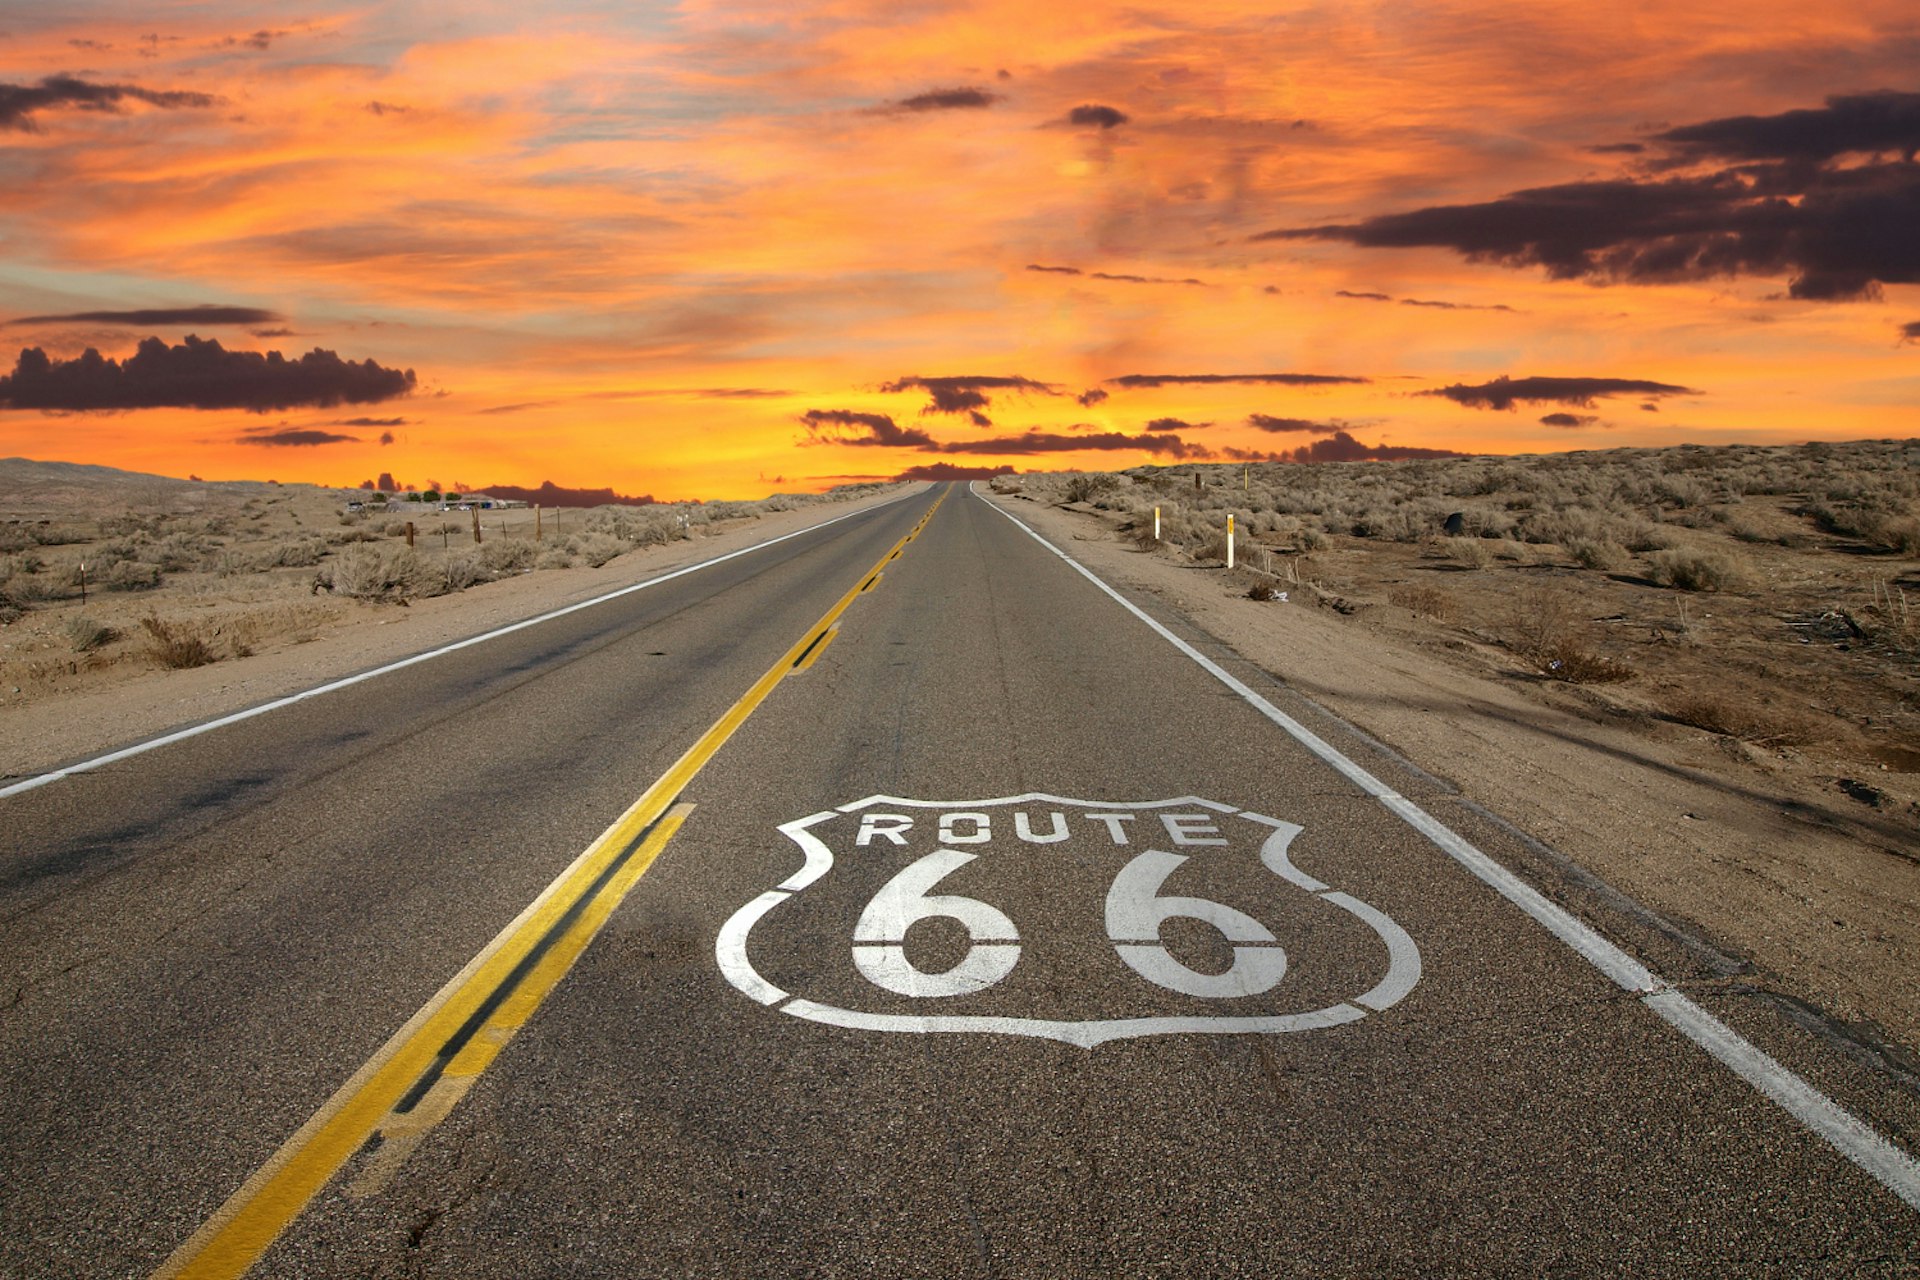 Features - Route 66 pavement sign sunrise in California's Mojave desert.